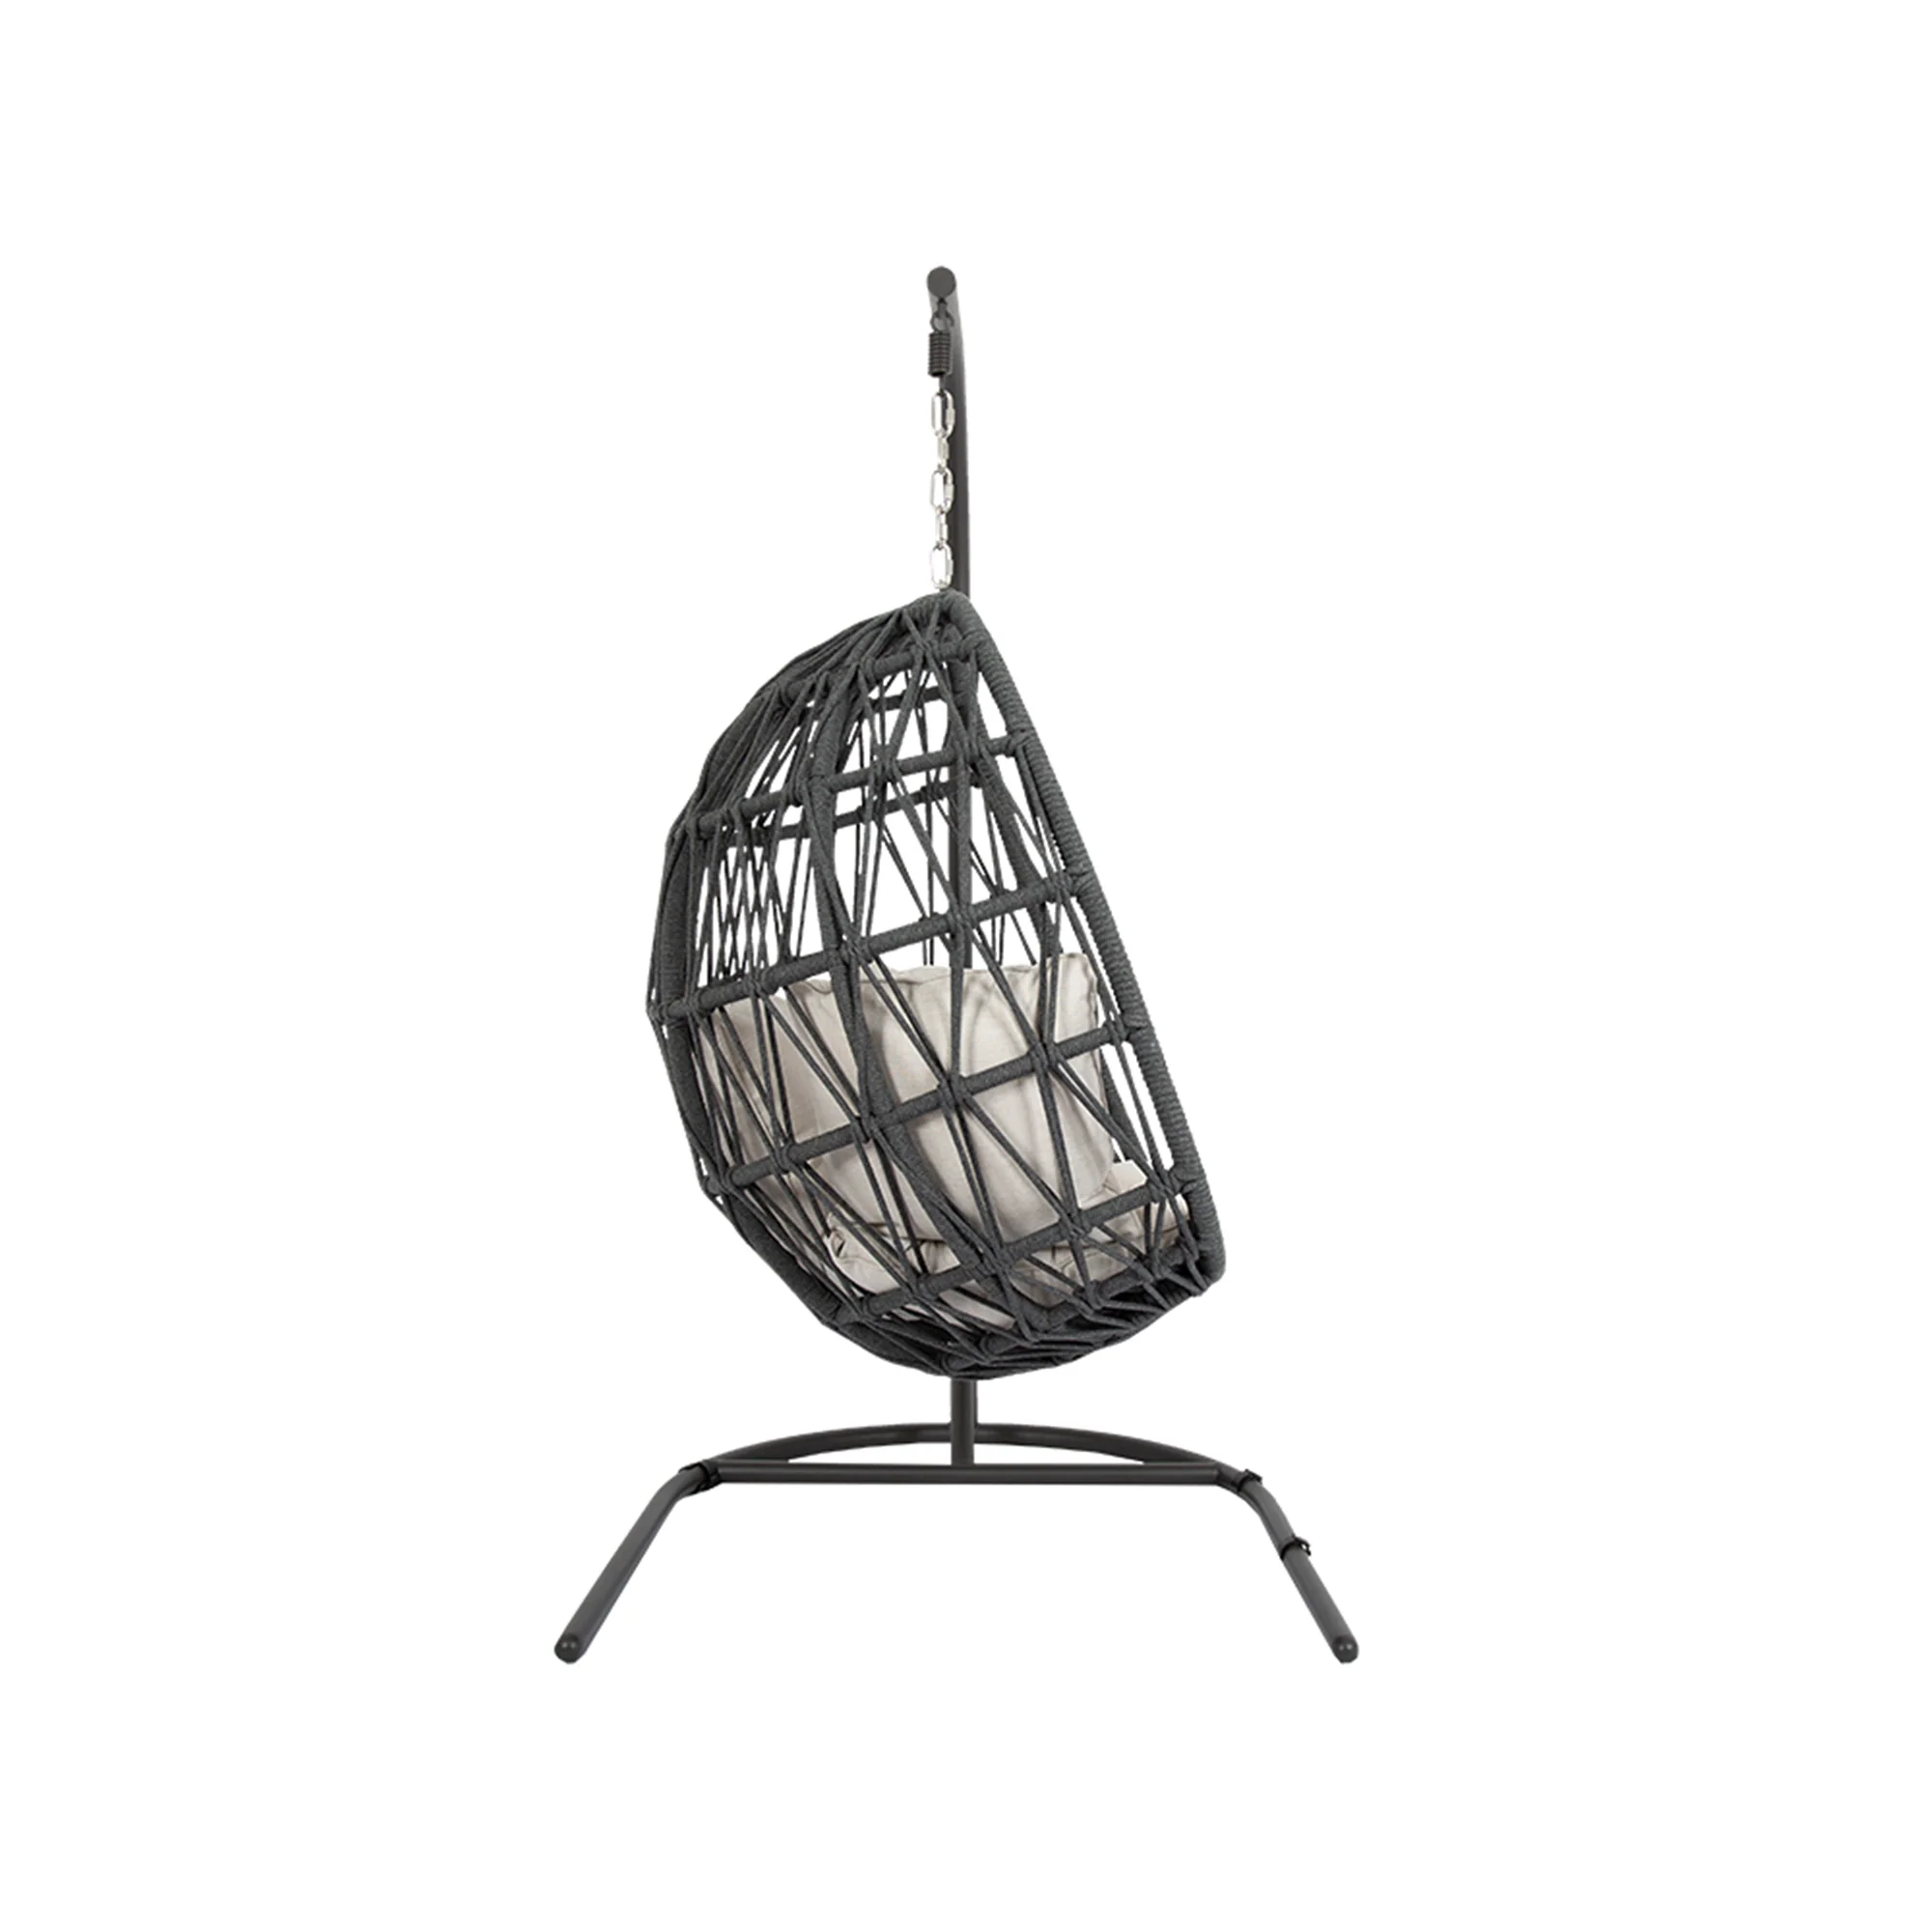 Naaru Single Seater Hanging Swing With Stand For Balcony , Garden (Dark Grey) Braided & Rope